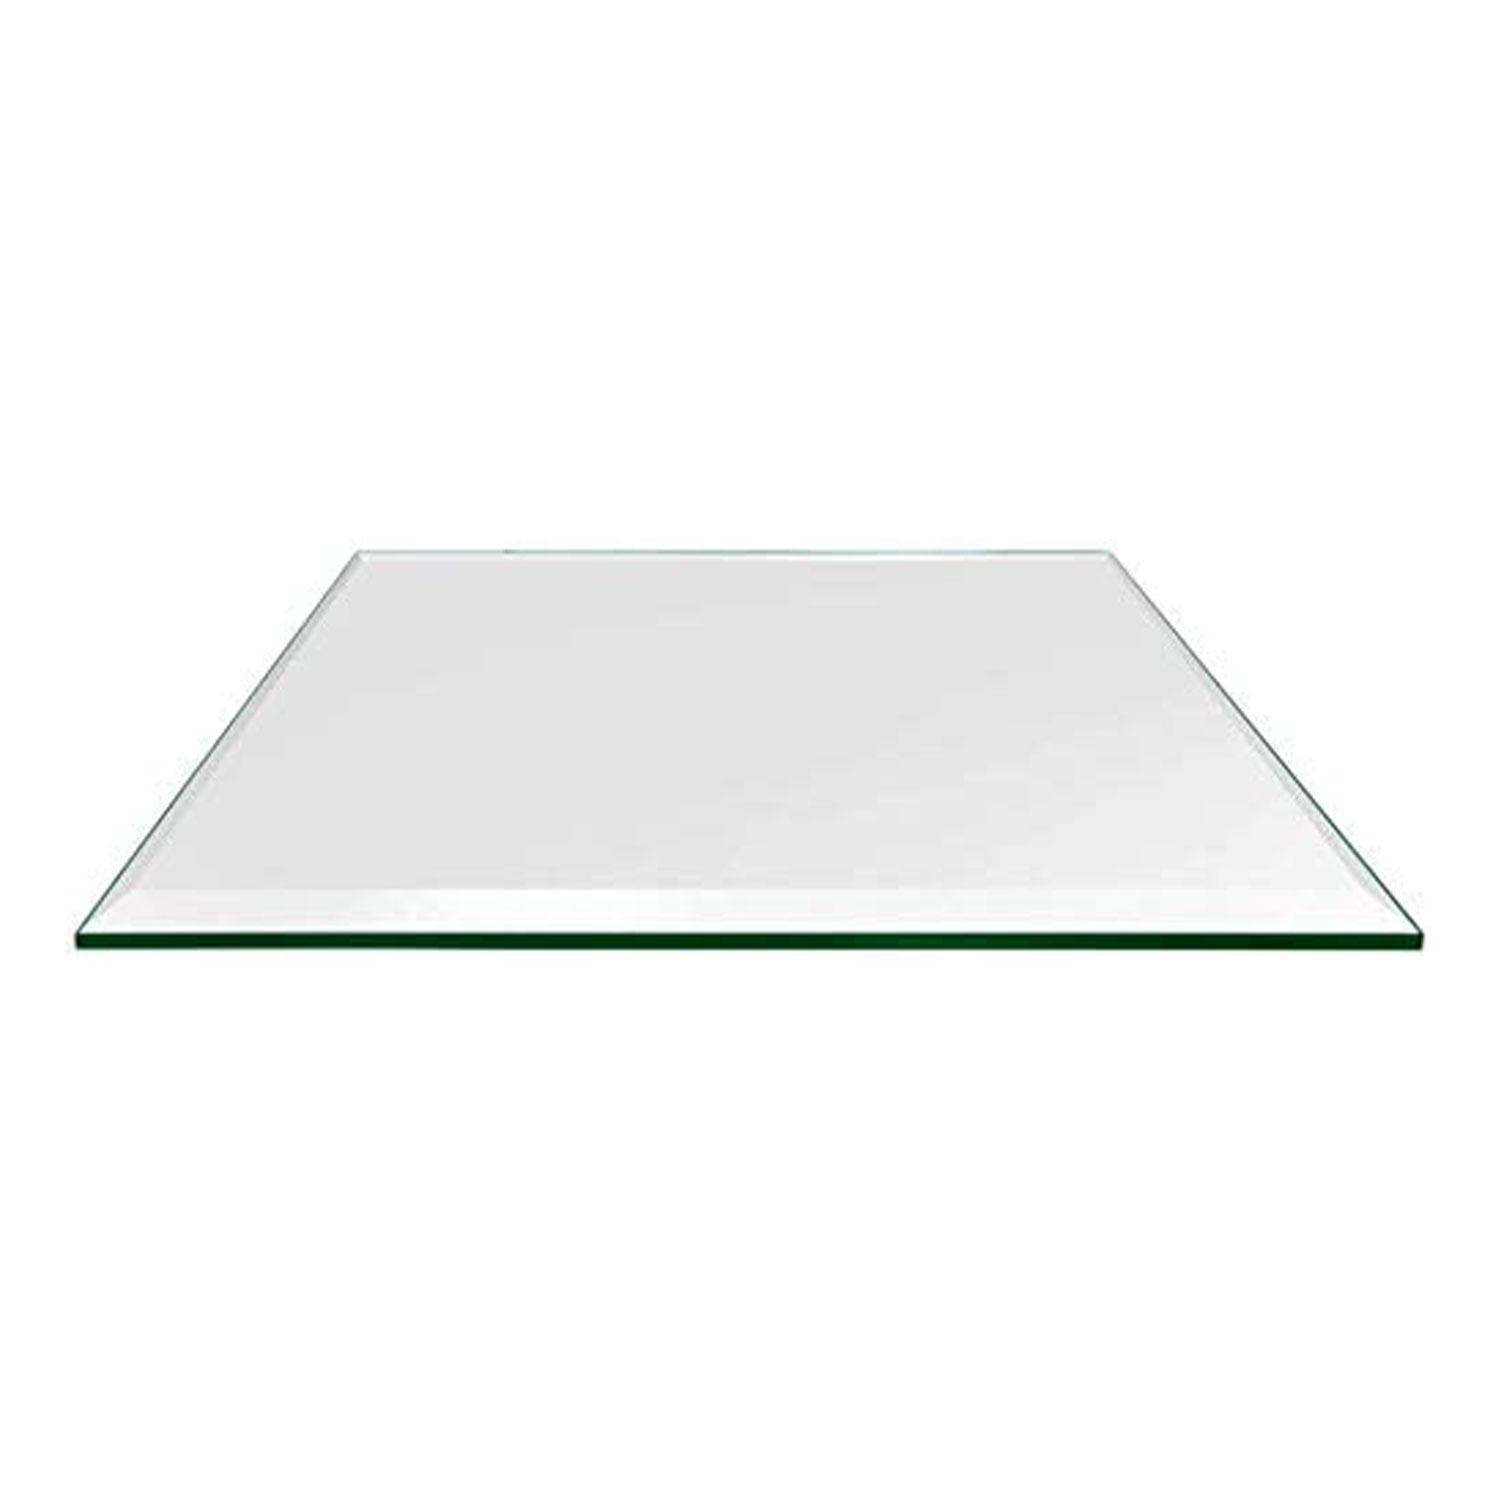 Dulles Glass 20 Inch Round Flat Polish 3/8 Inch Thick Tempered Glass Table Top 851175003569 